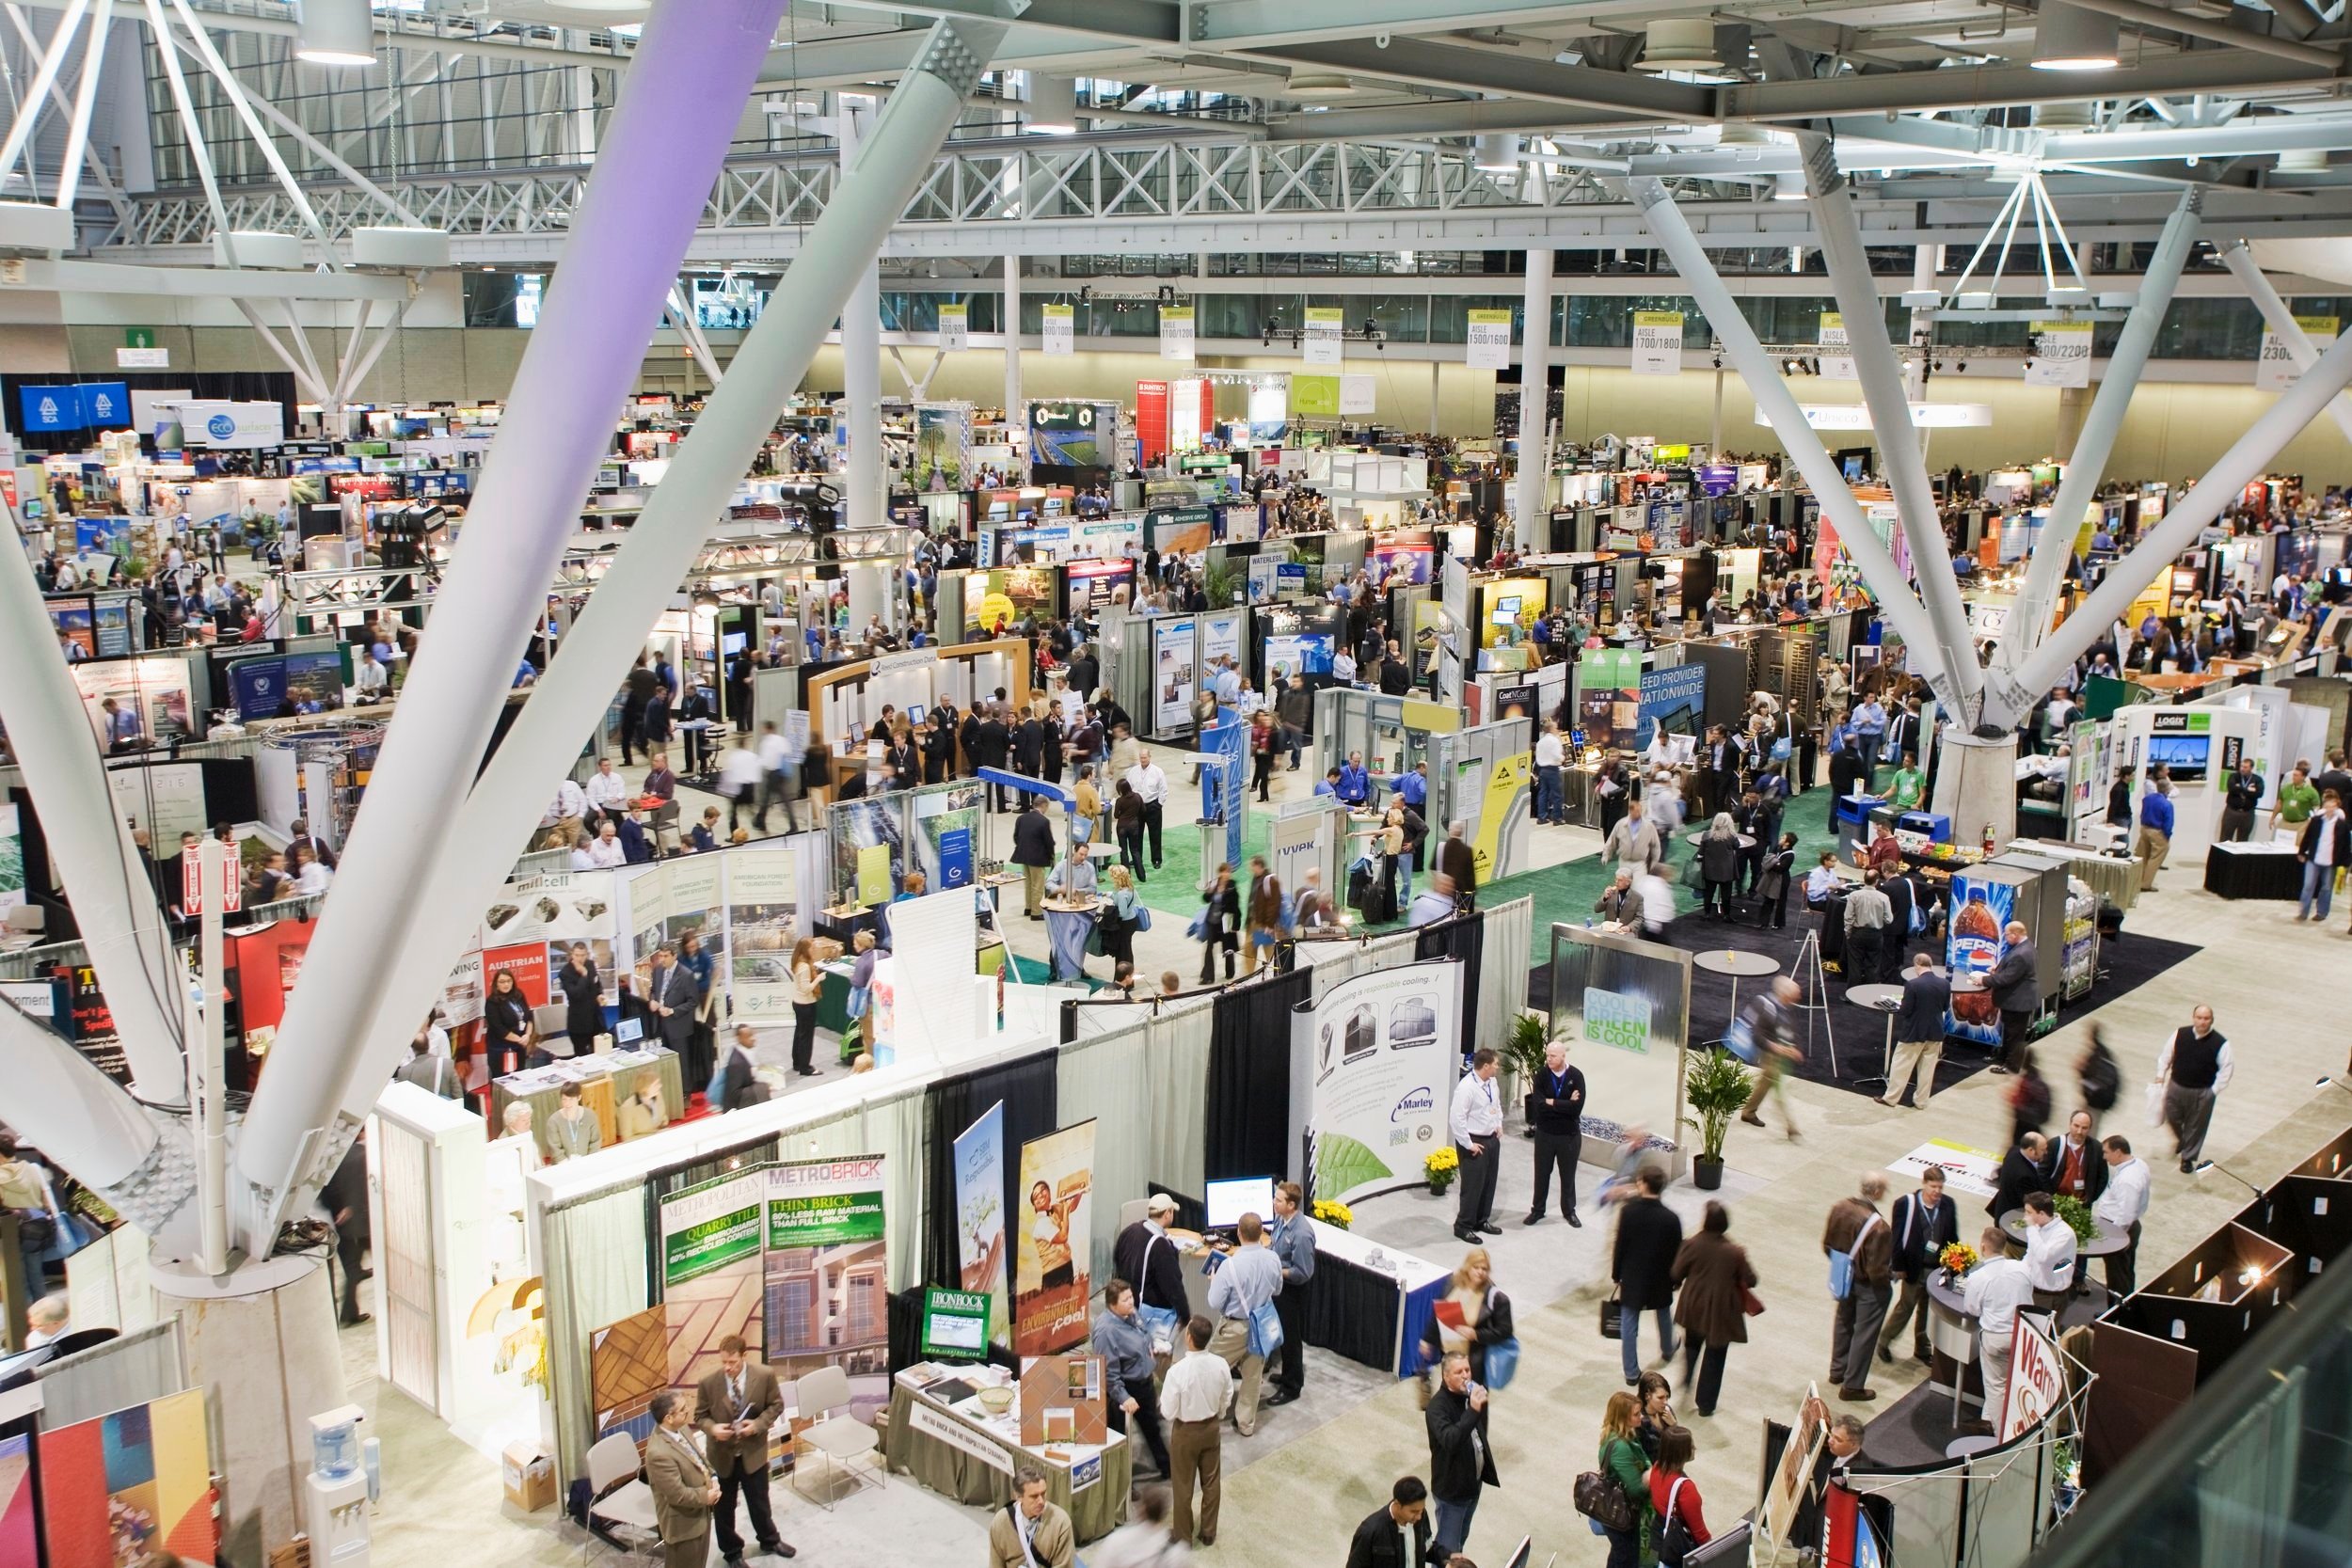 greenbuild-expo-very-large-tradeshow-at-boston-convention-center_6002073334_o.jpg